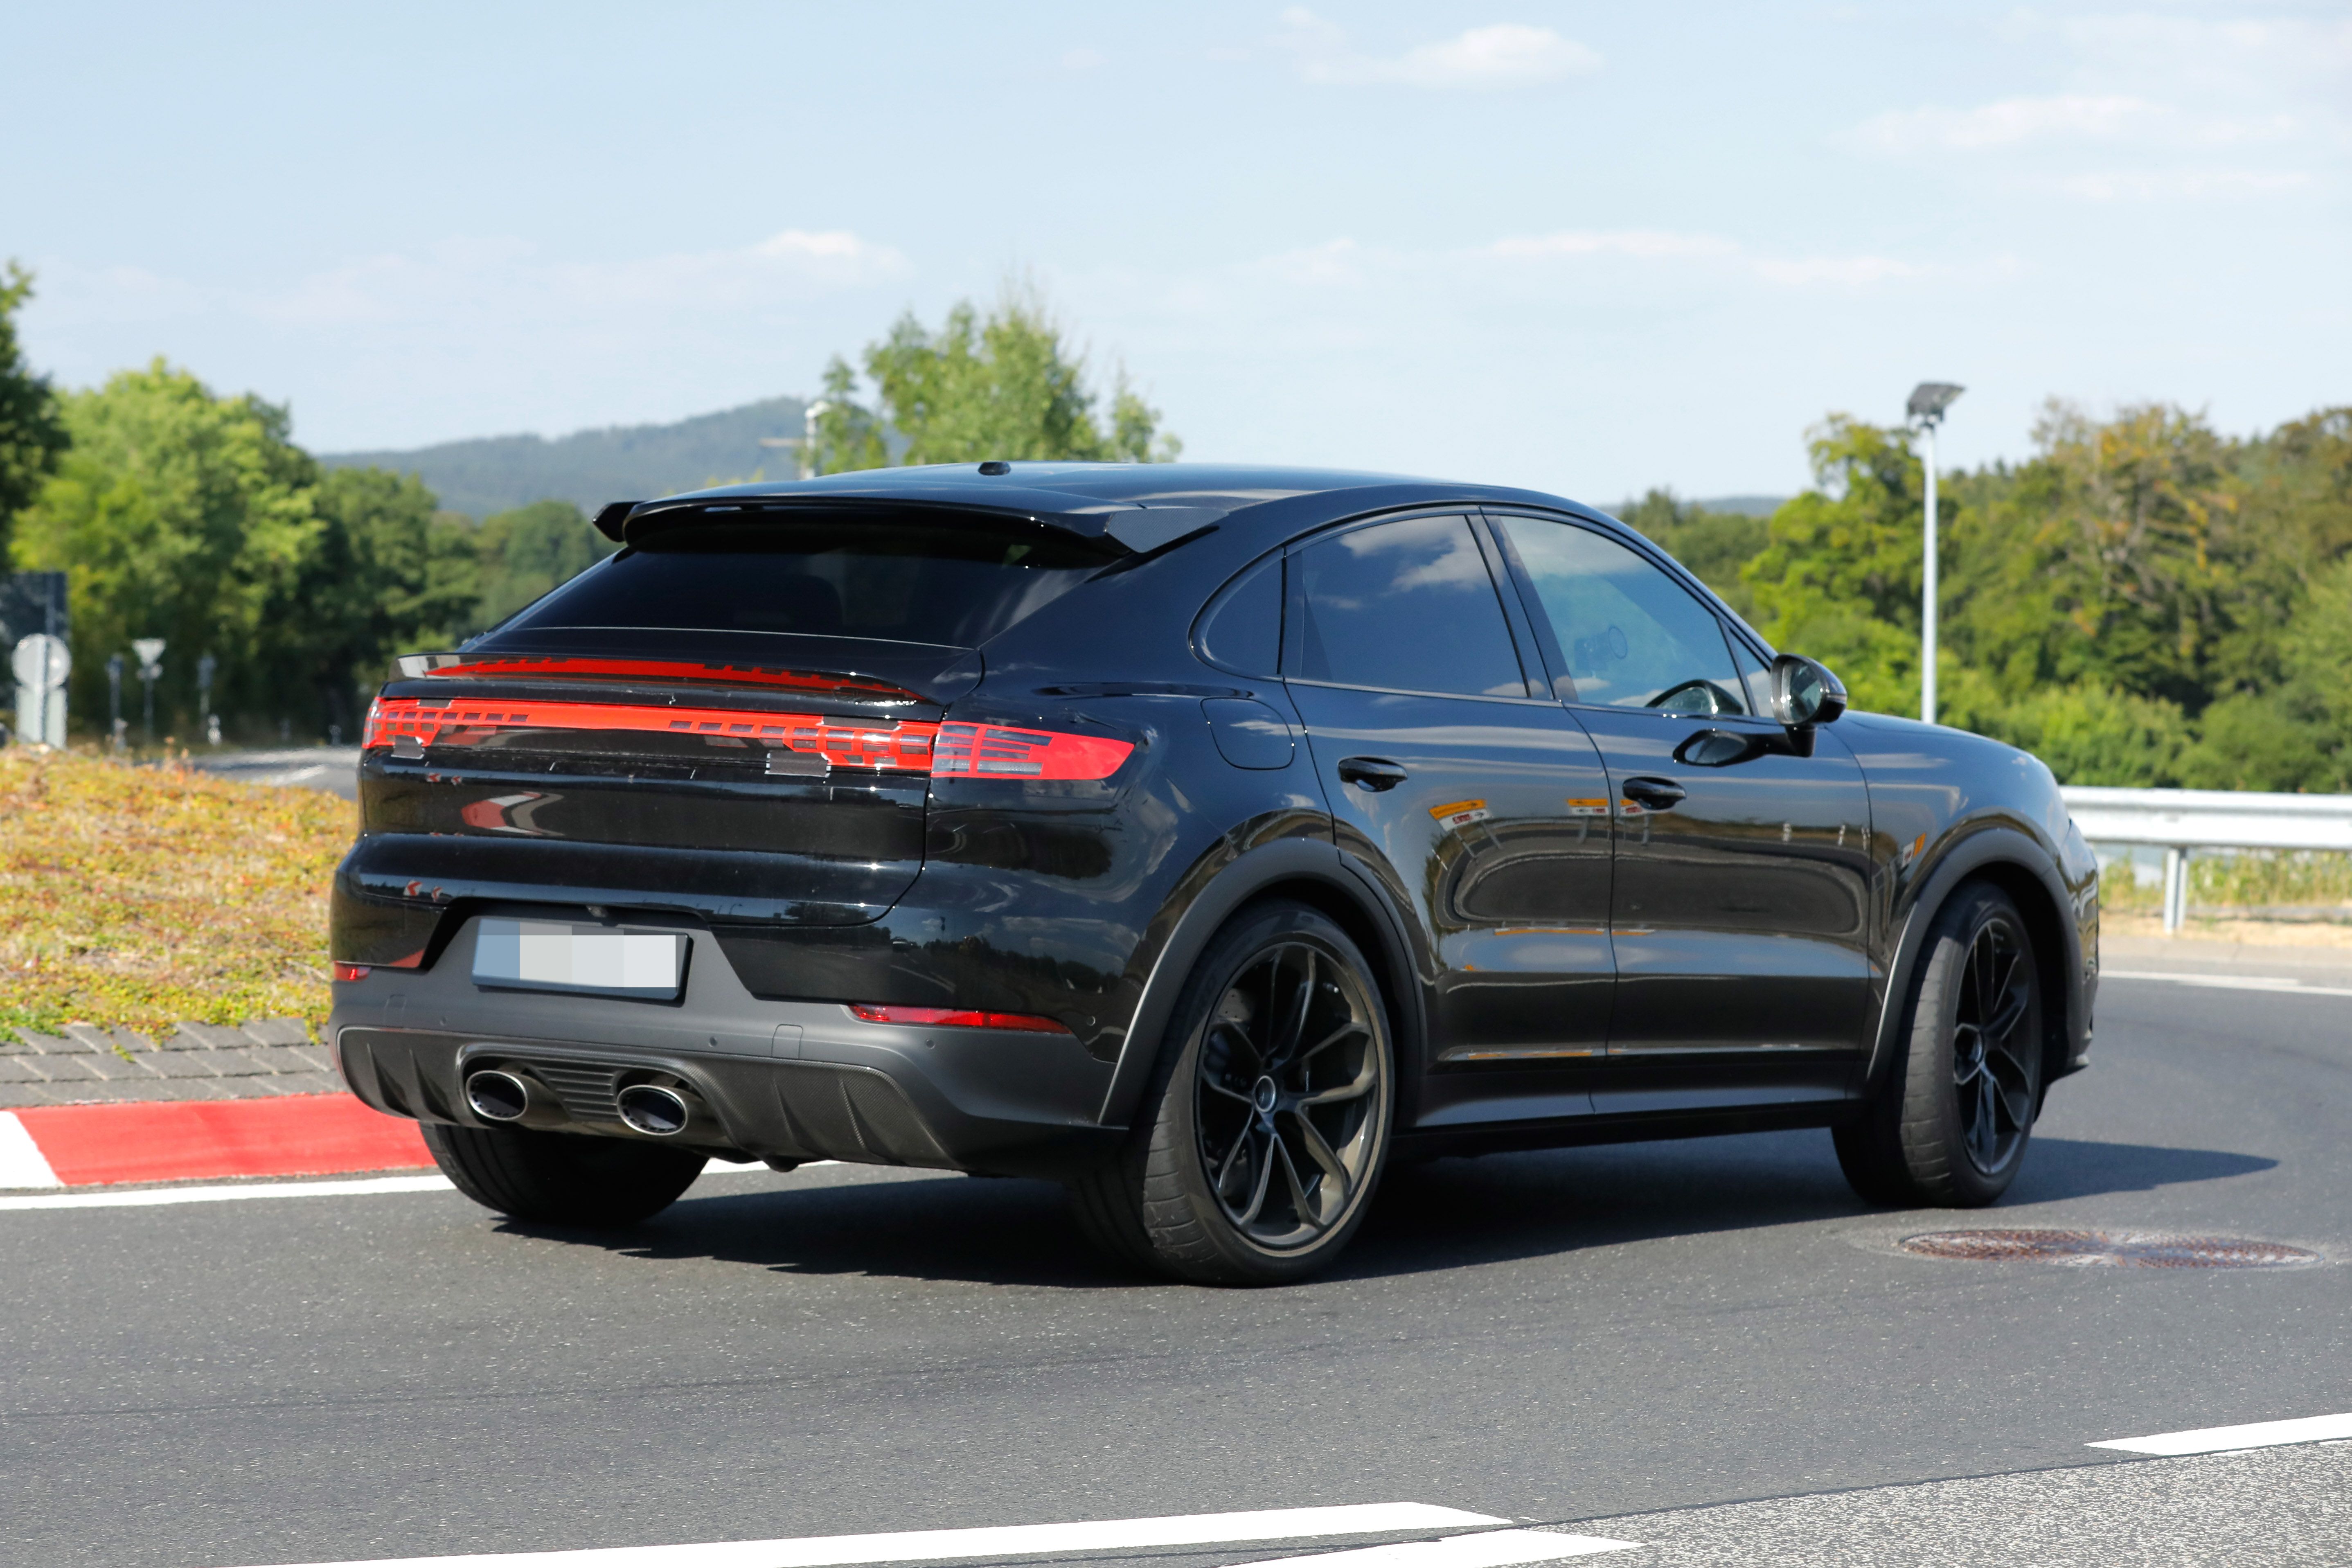 Spy Shots An Early Look at the 2023 Porsche Cayenne Coupe GTS